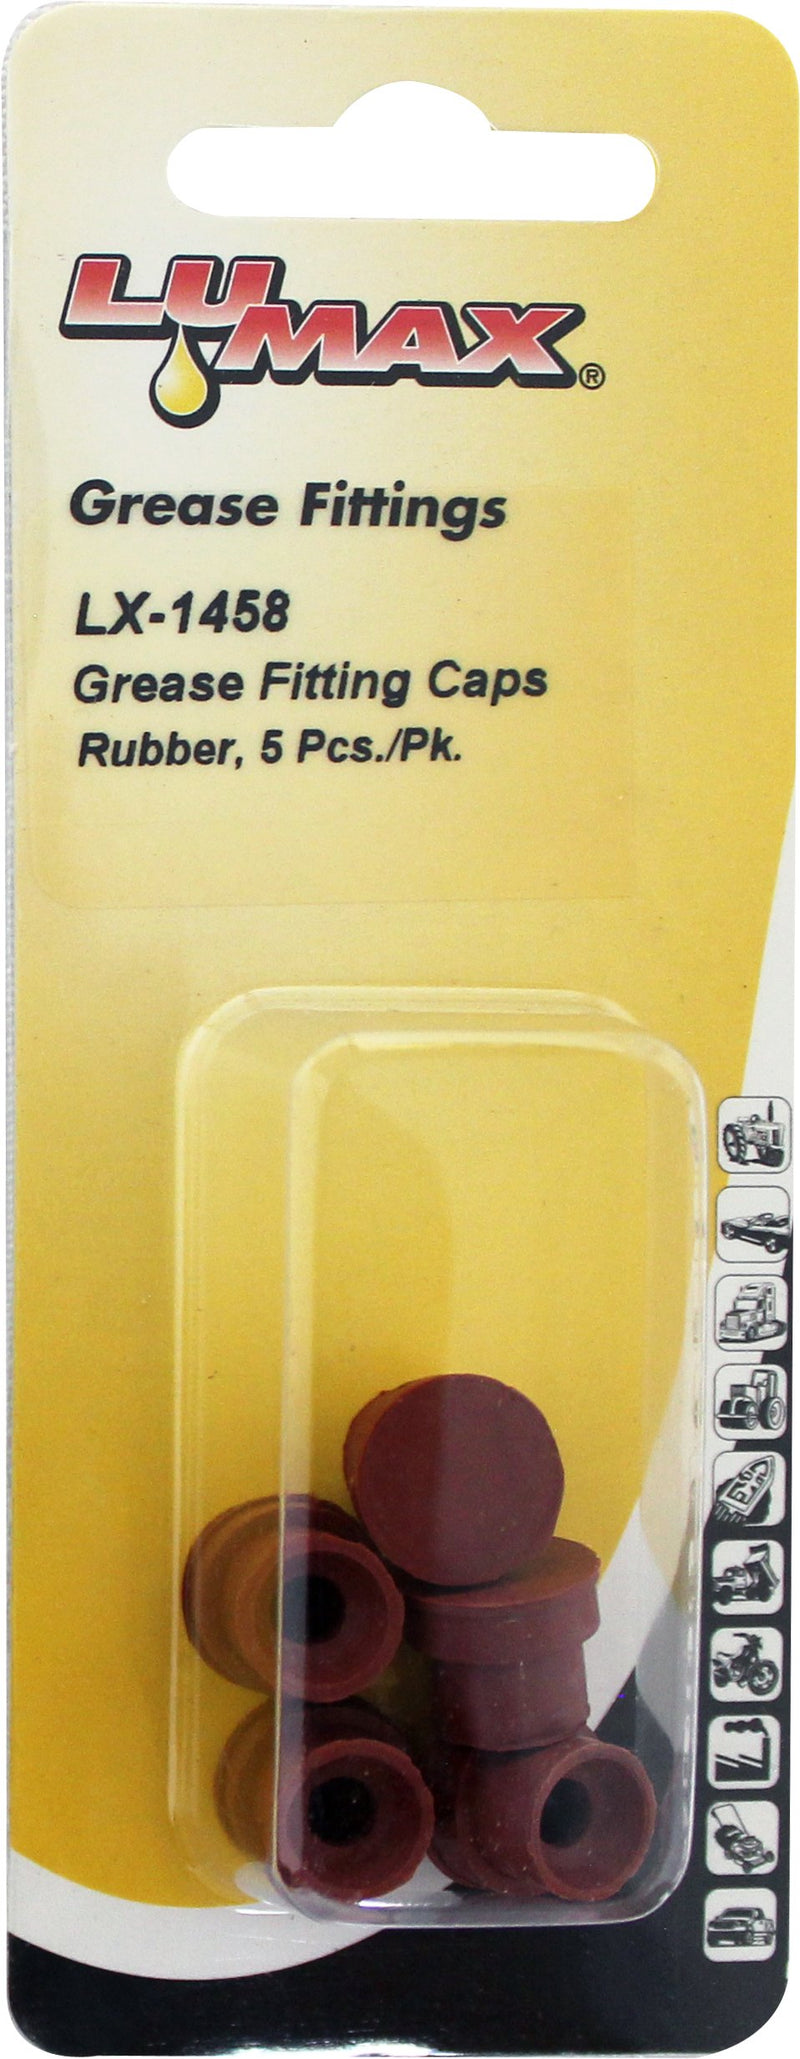 Lumax Silver LX-1458 Rubber, (Pack of 5) Caps Keep Grease Clean to Help Protect The Fitting Against Dirt, Moisture and Contamination, 5 Pack - LeoForward Australia